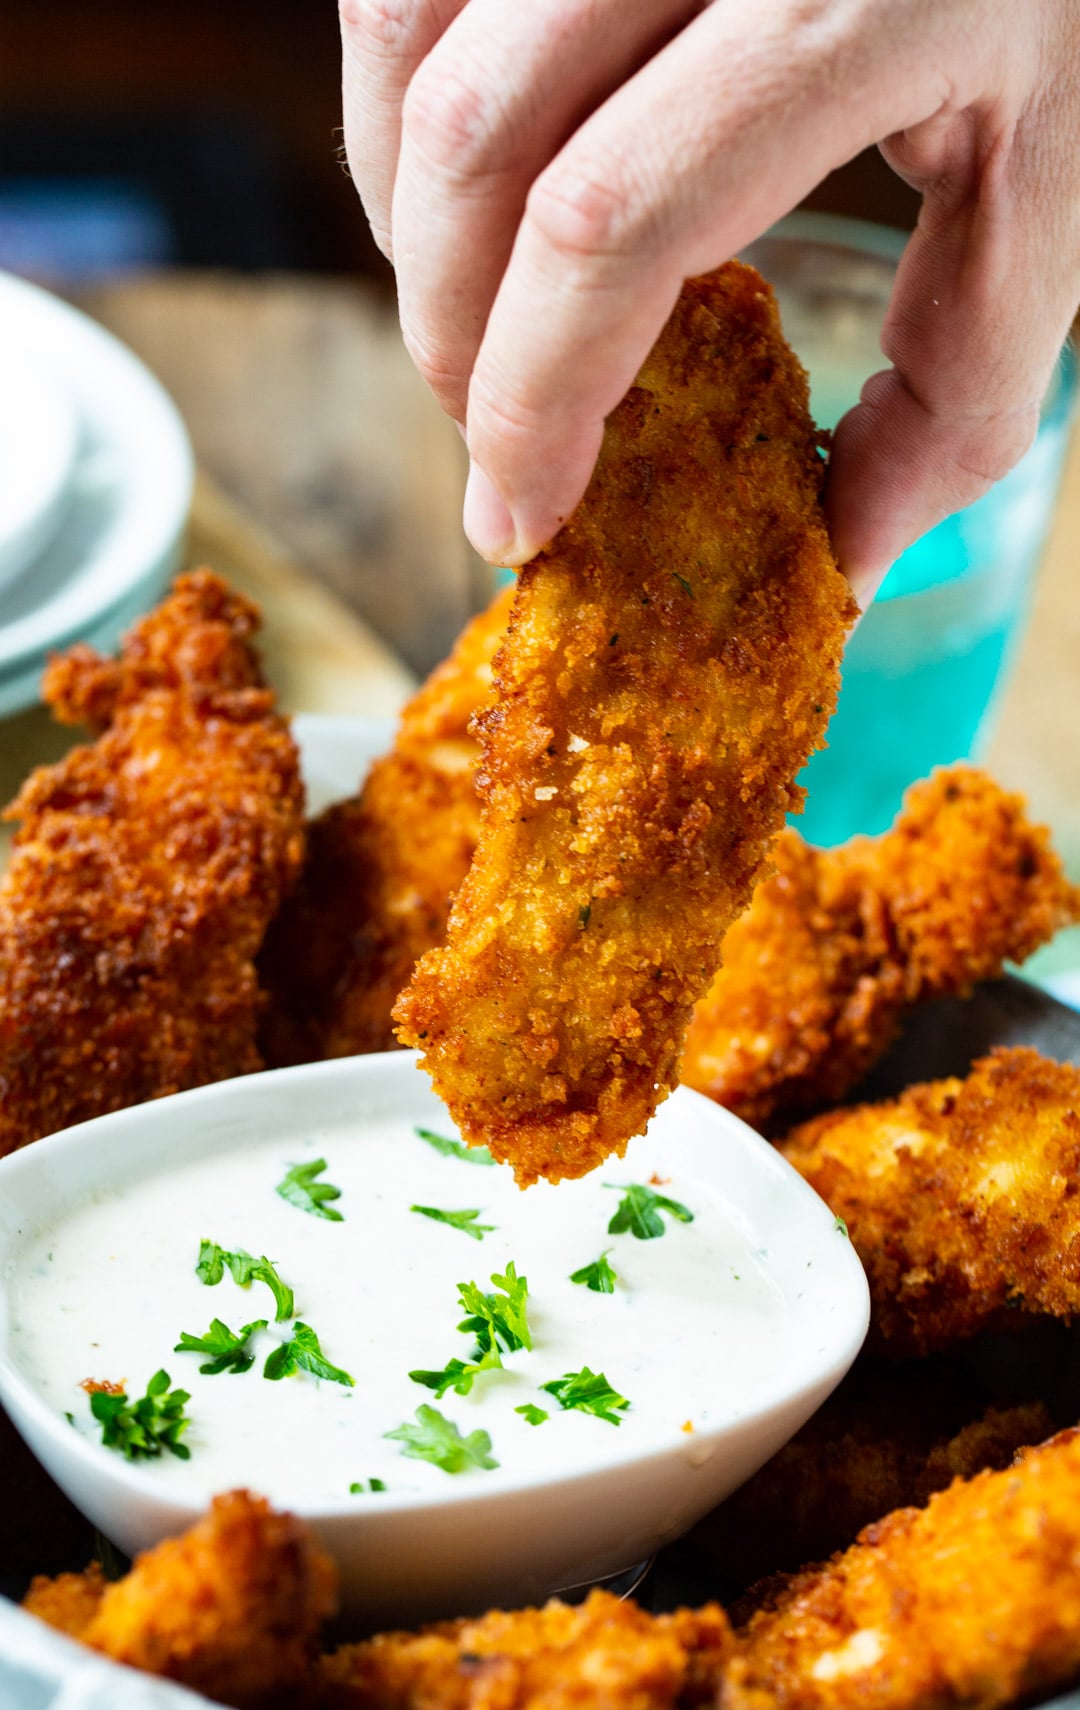 CHicken finger getting dipped in ranch dressing.